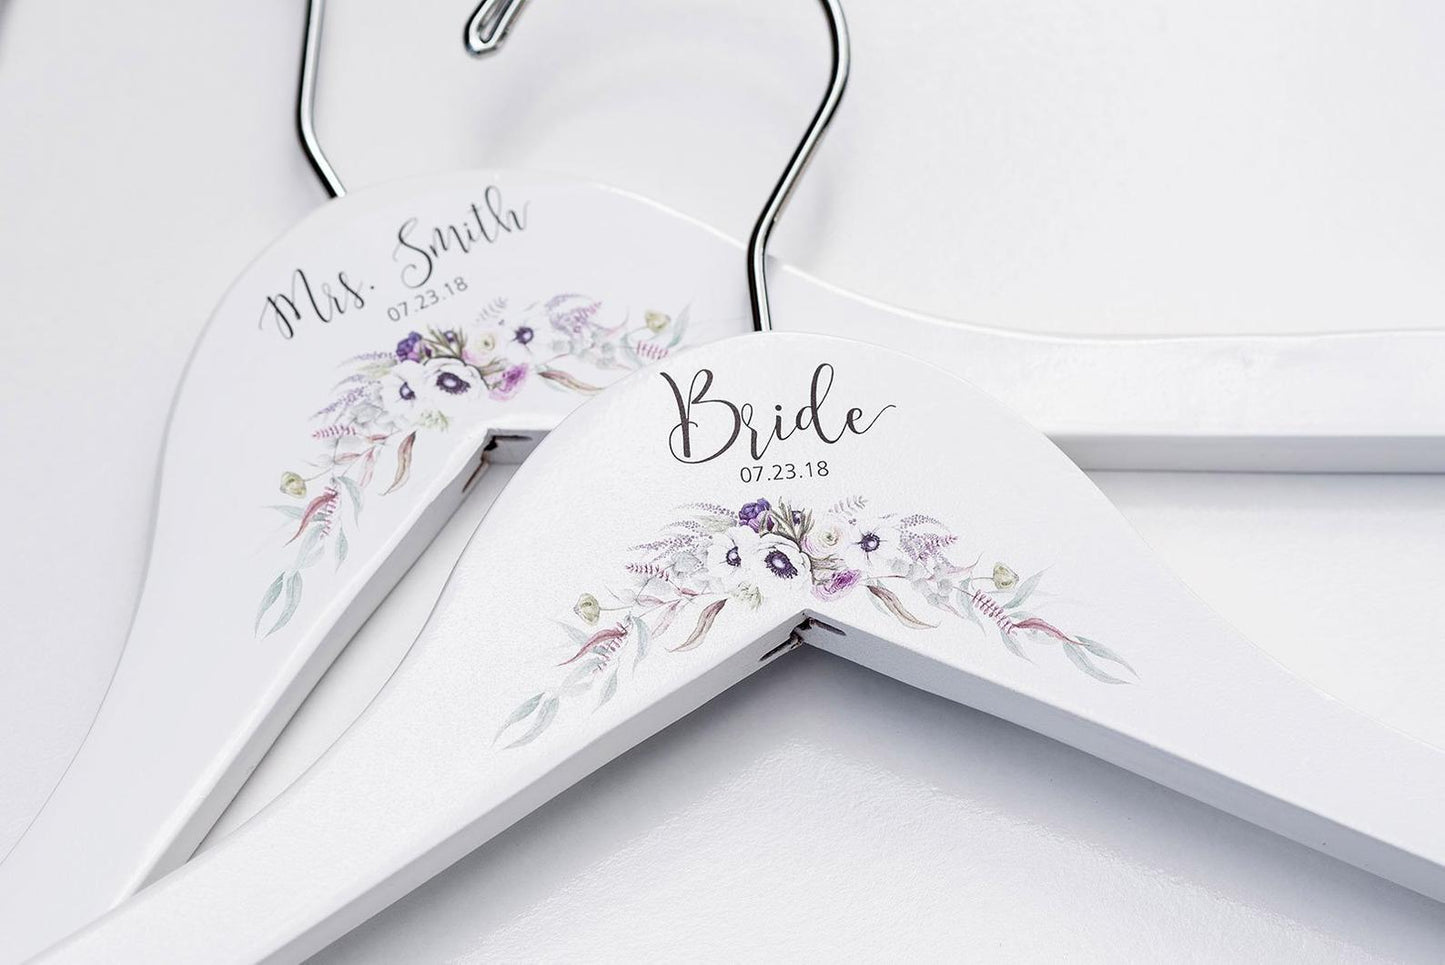 White Bridesmaid Printed Hanger with purple floral design